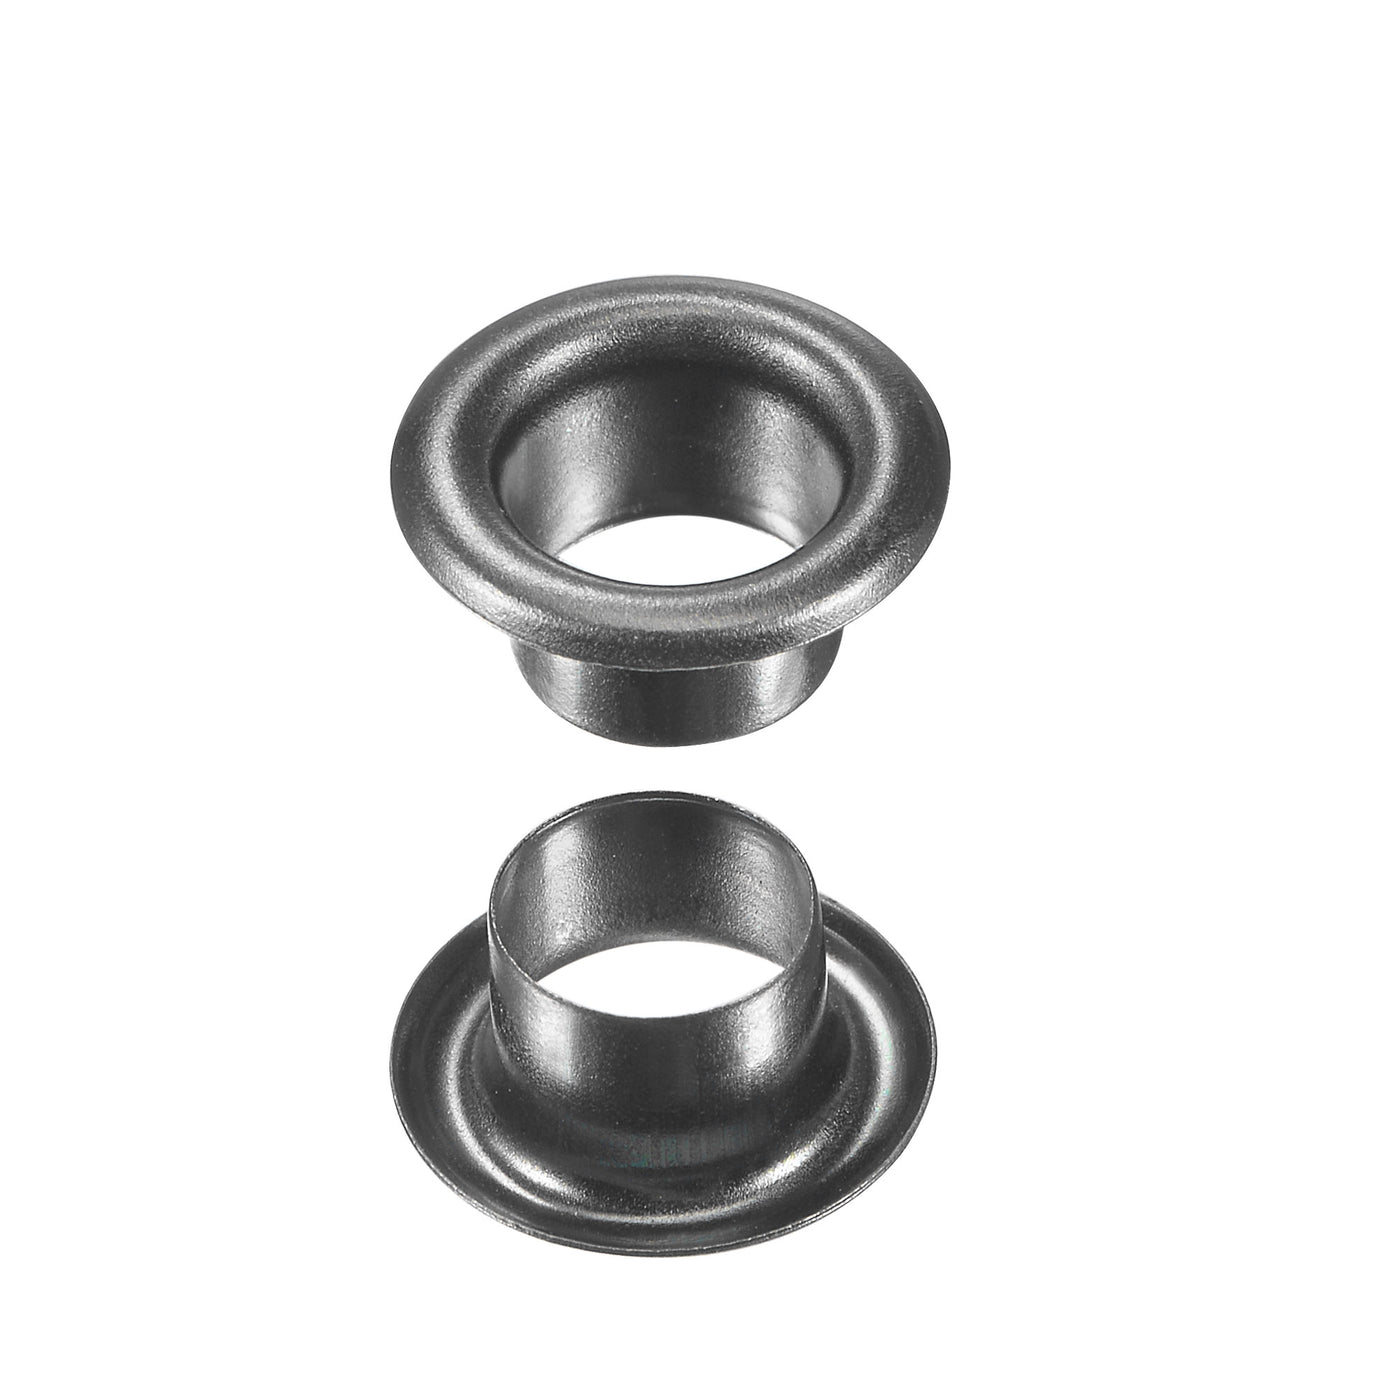 uxcell Uxcell Eyelet with Washer 10.5x6x5mm Copper Grommet Chrome Plated Black 200 Set